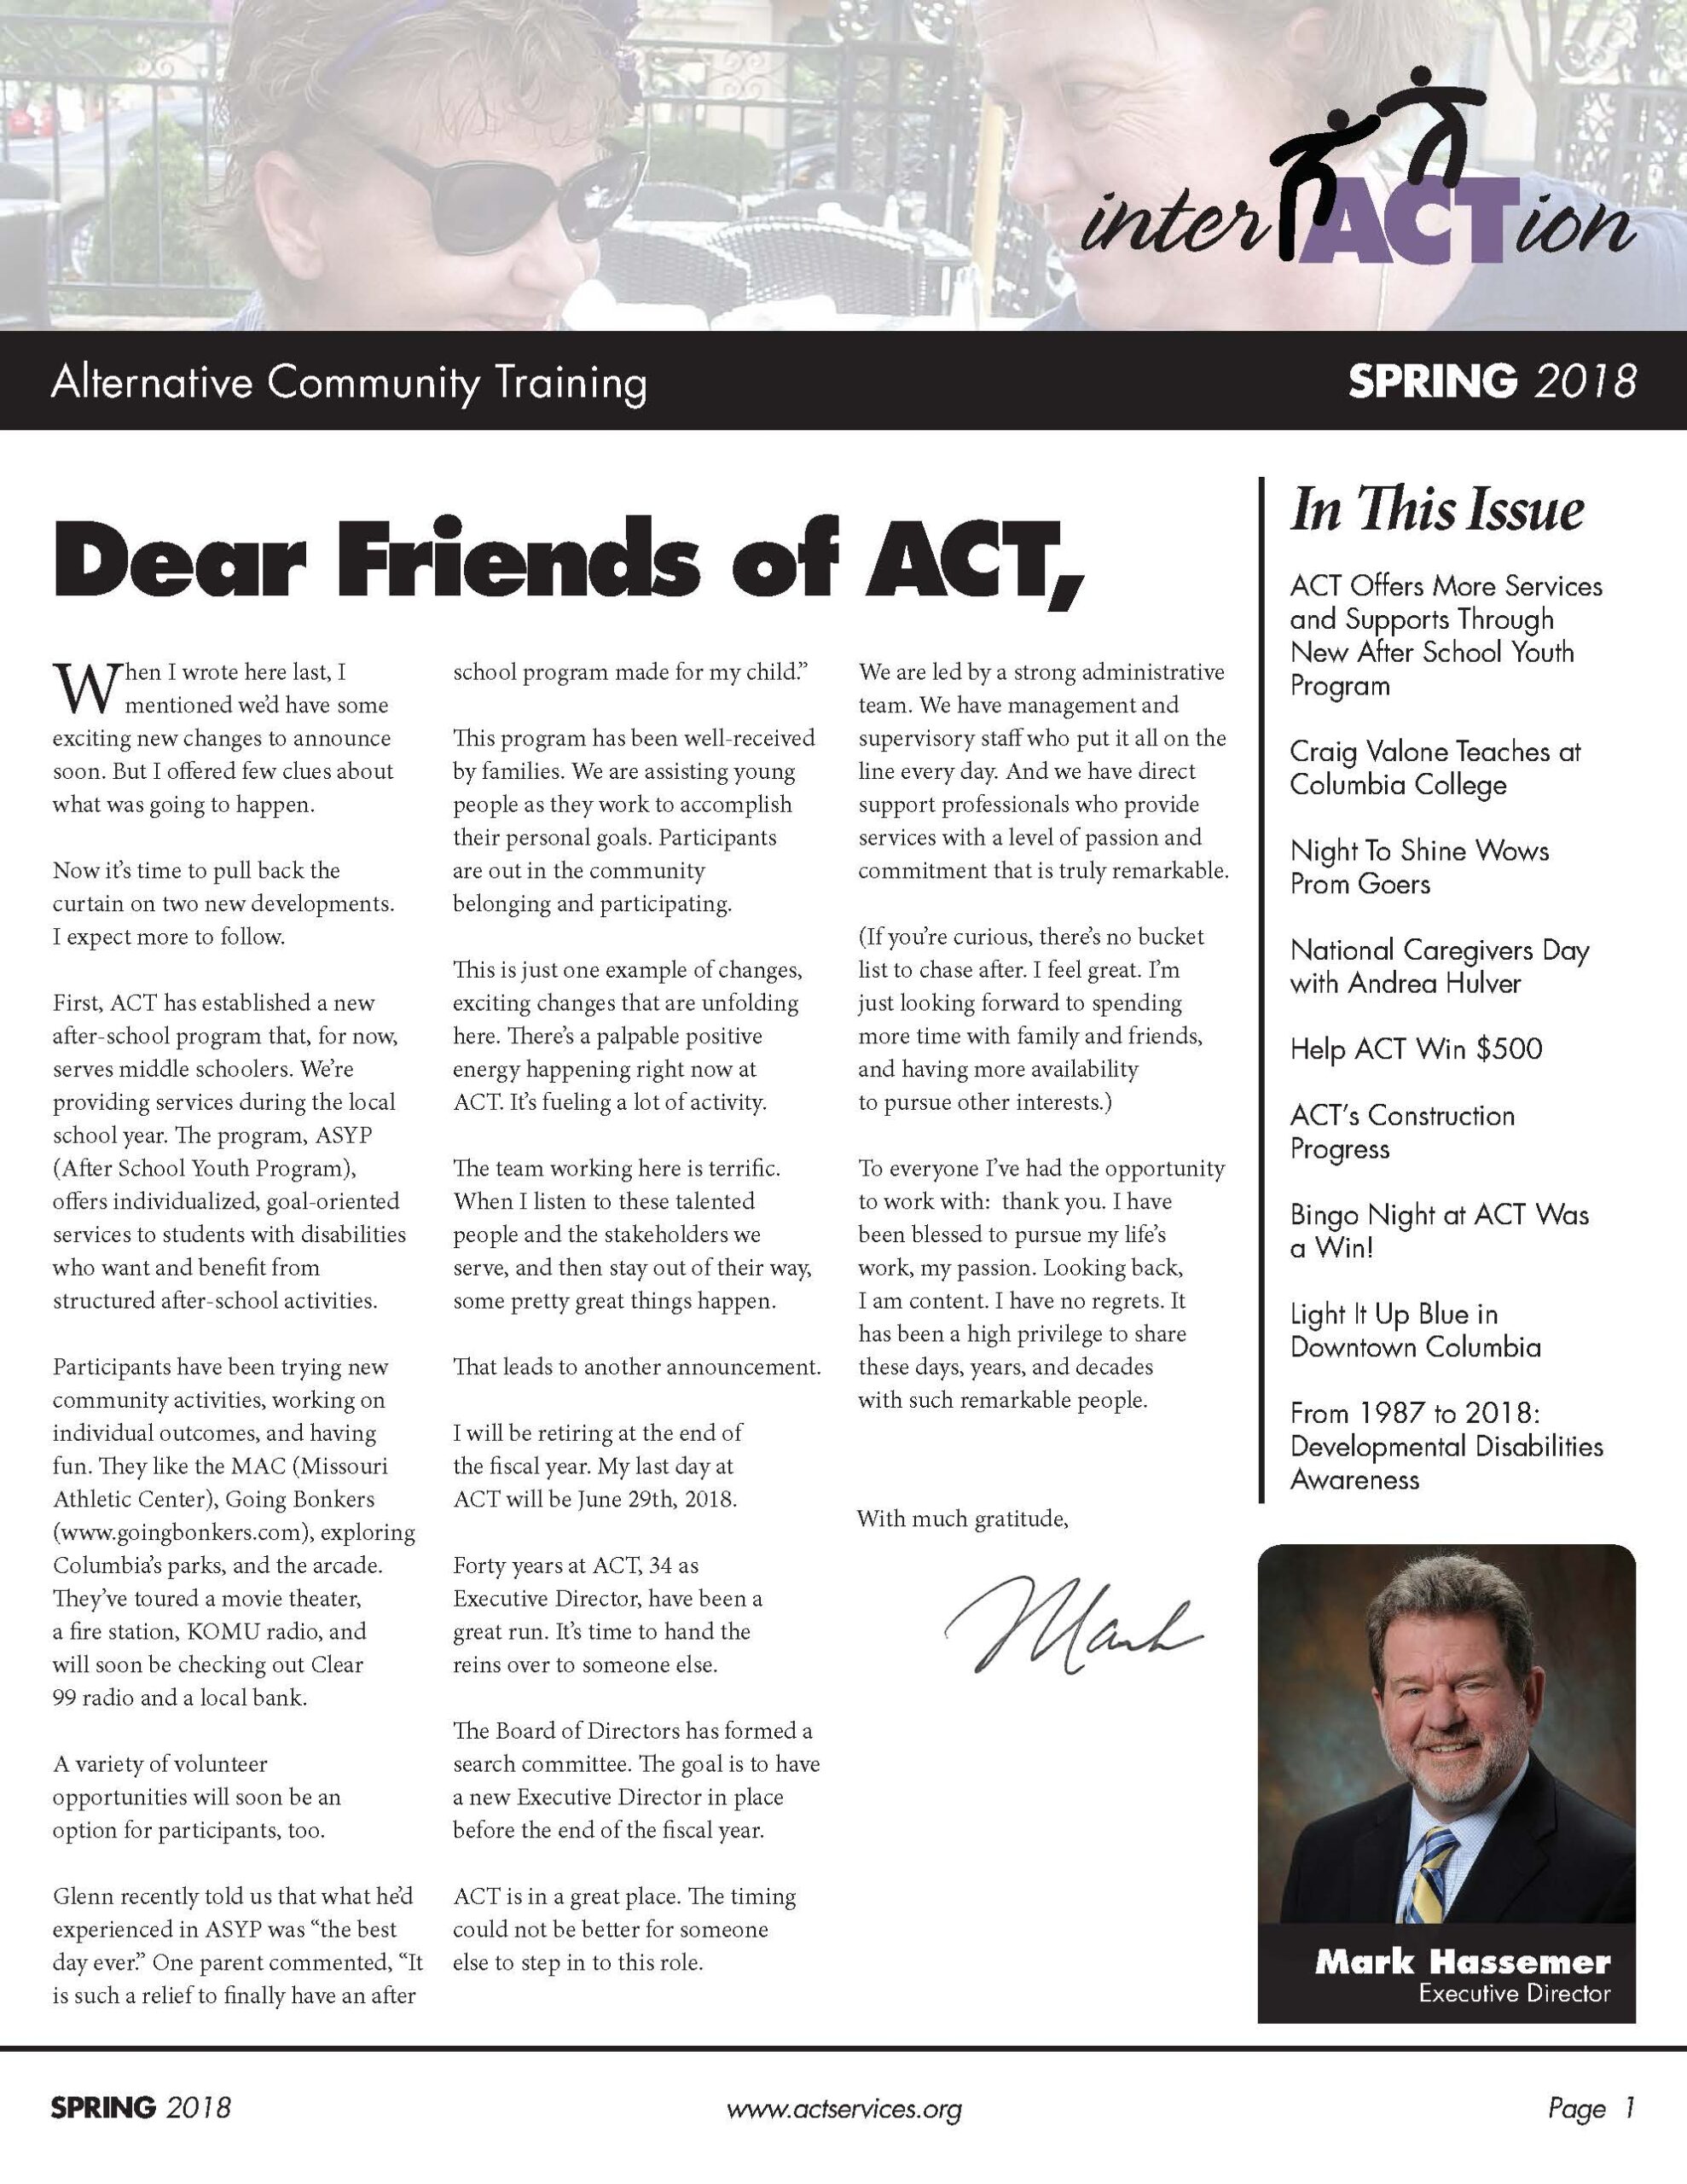 Image of the first page of the Spring 2018 ACT Newsletter